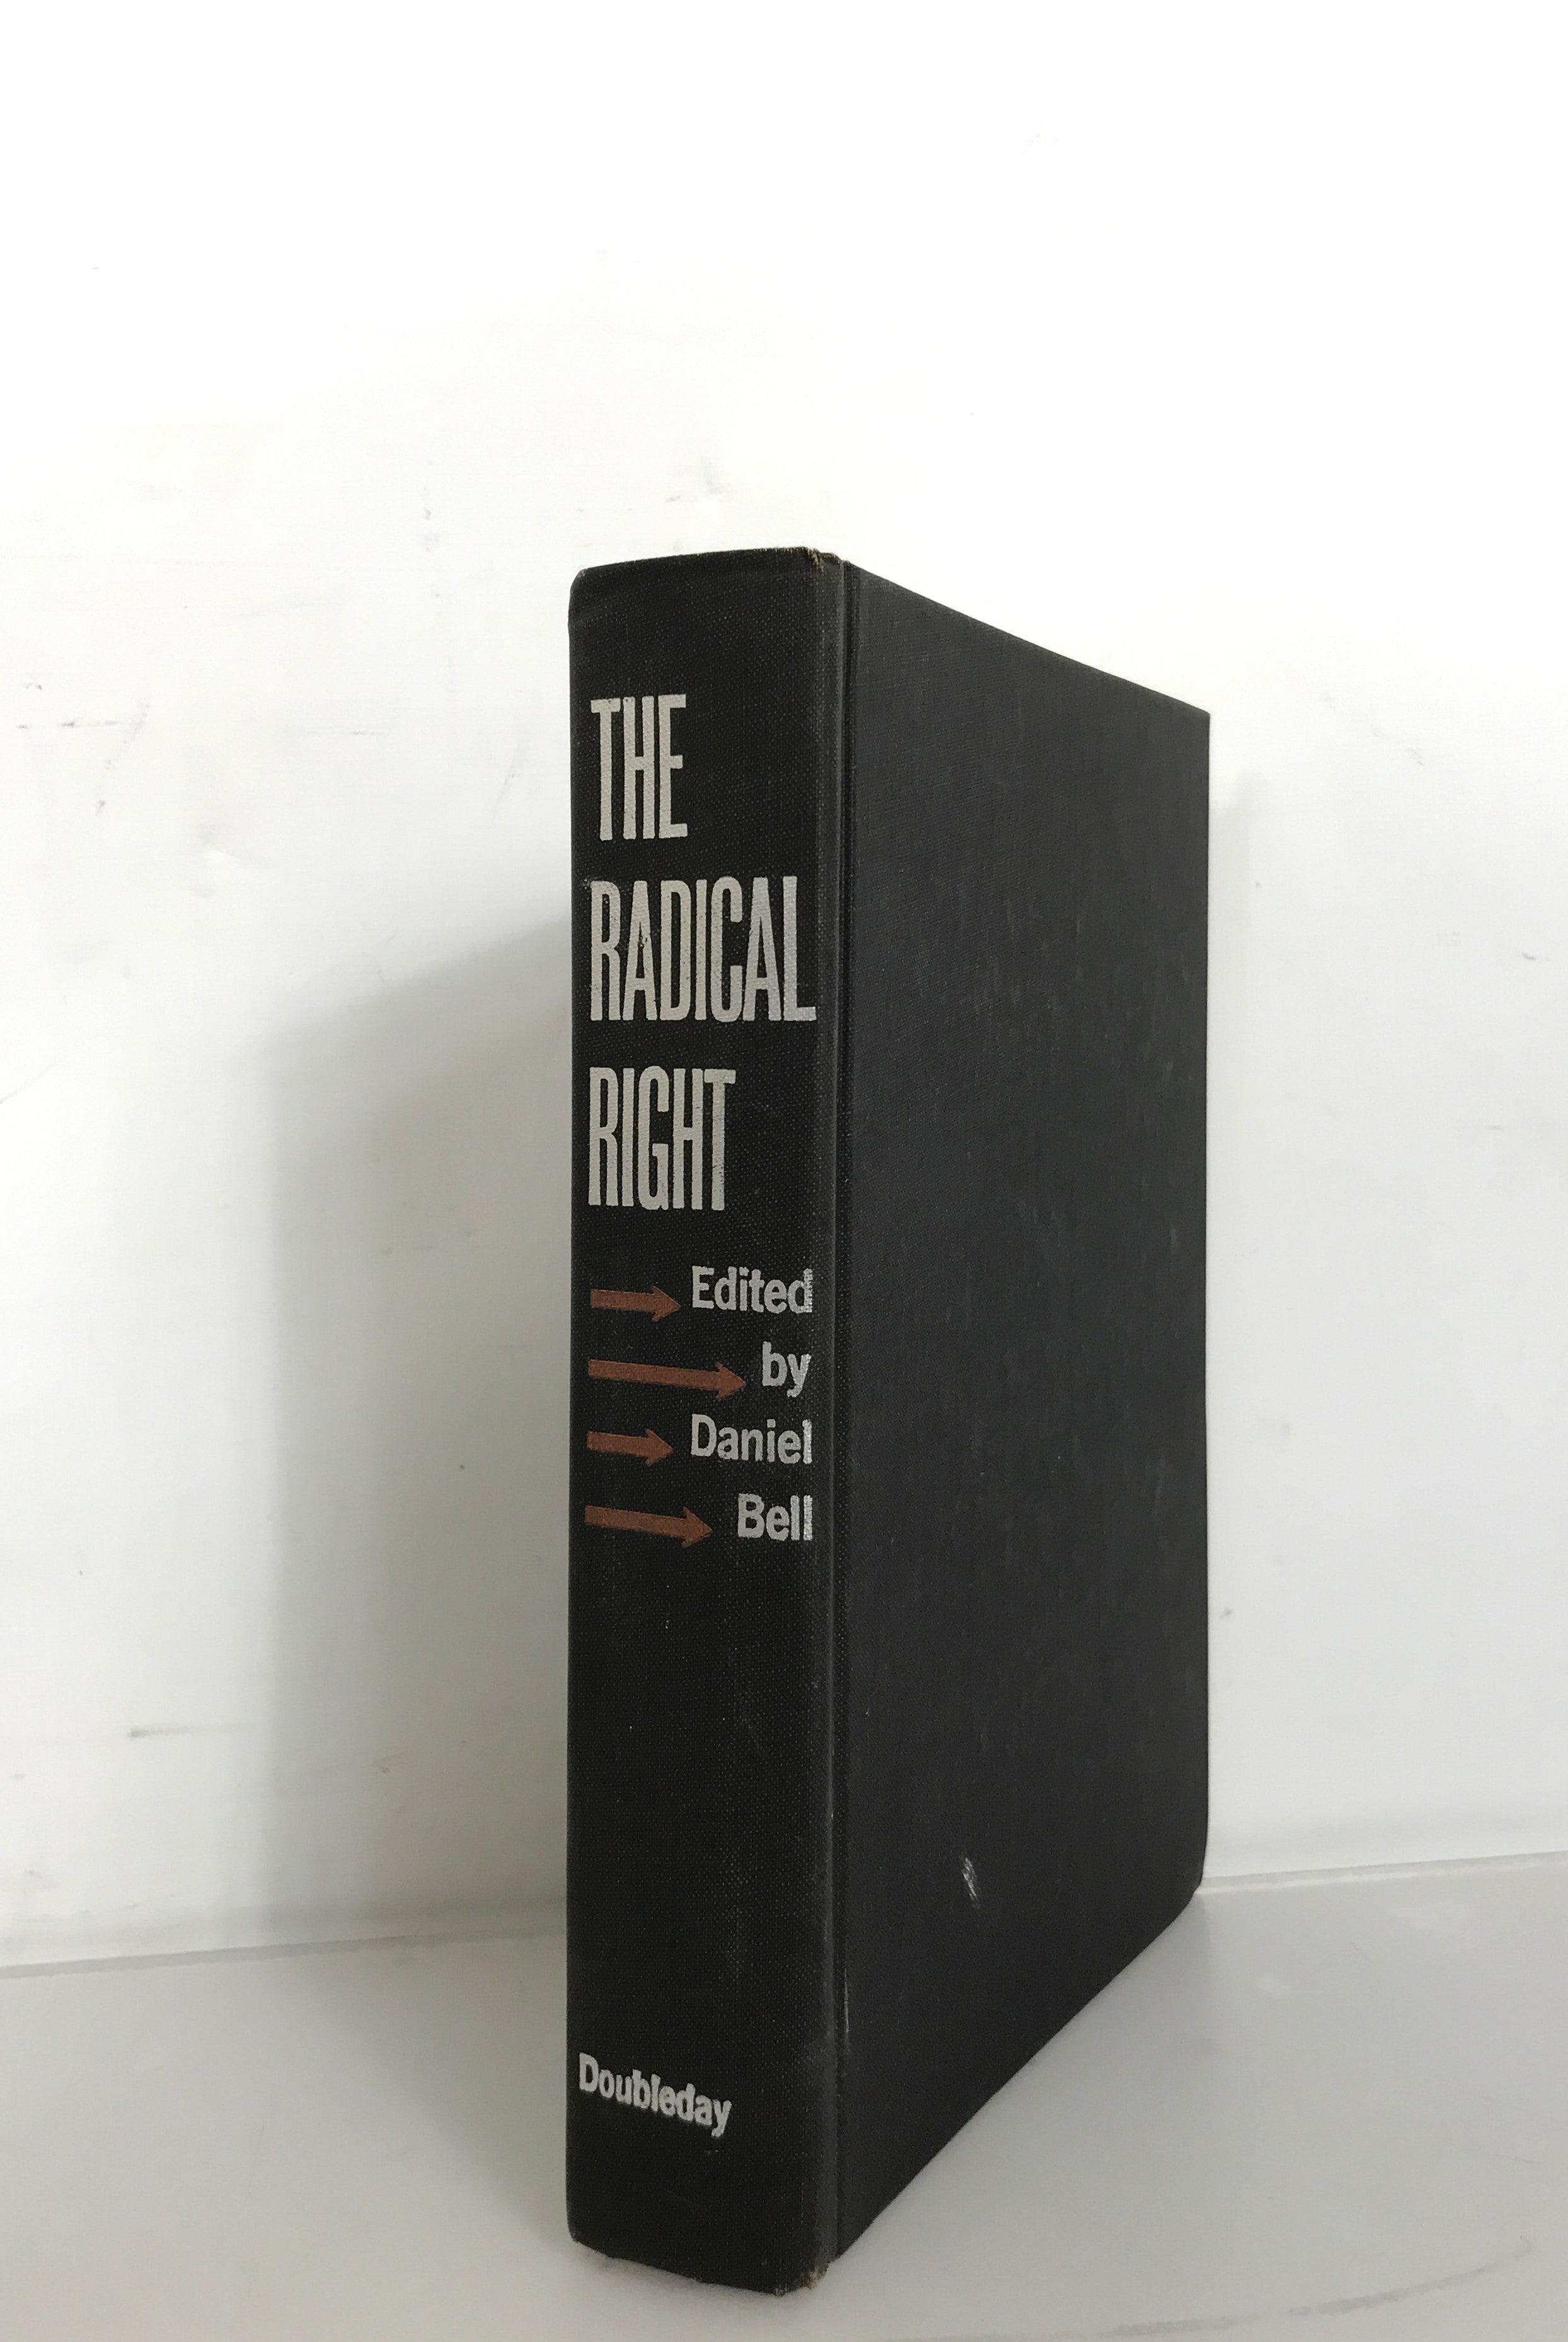 The Radical Right by Daniel Bell First Doubleday Edition 1963 HC